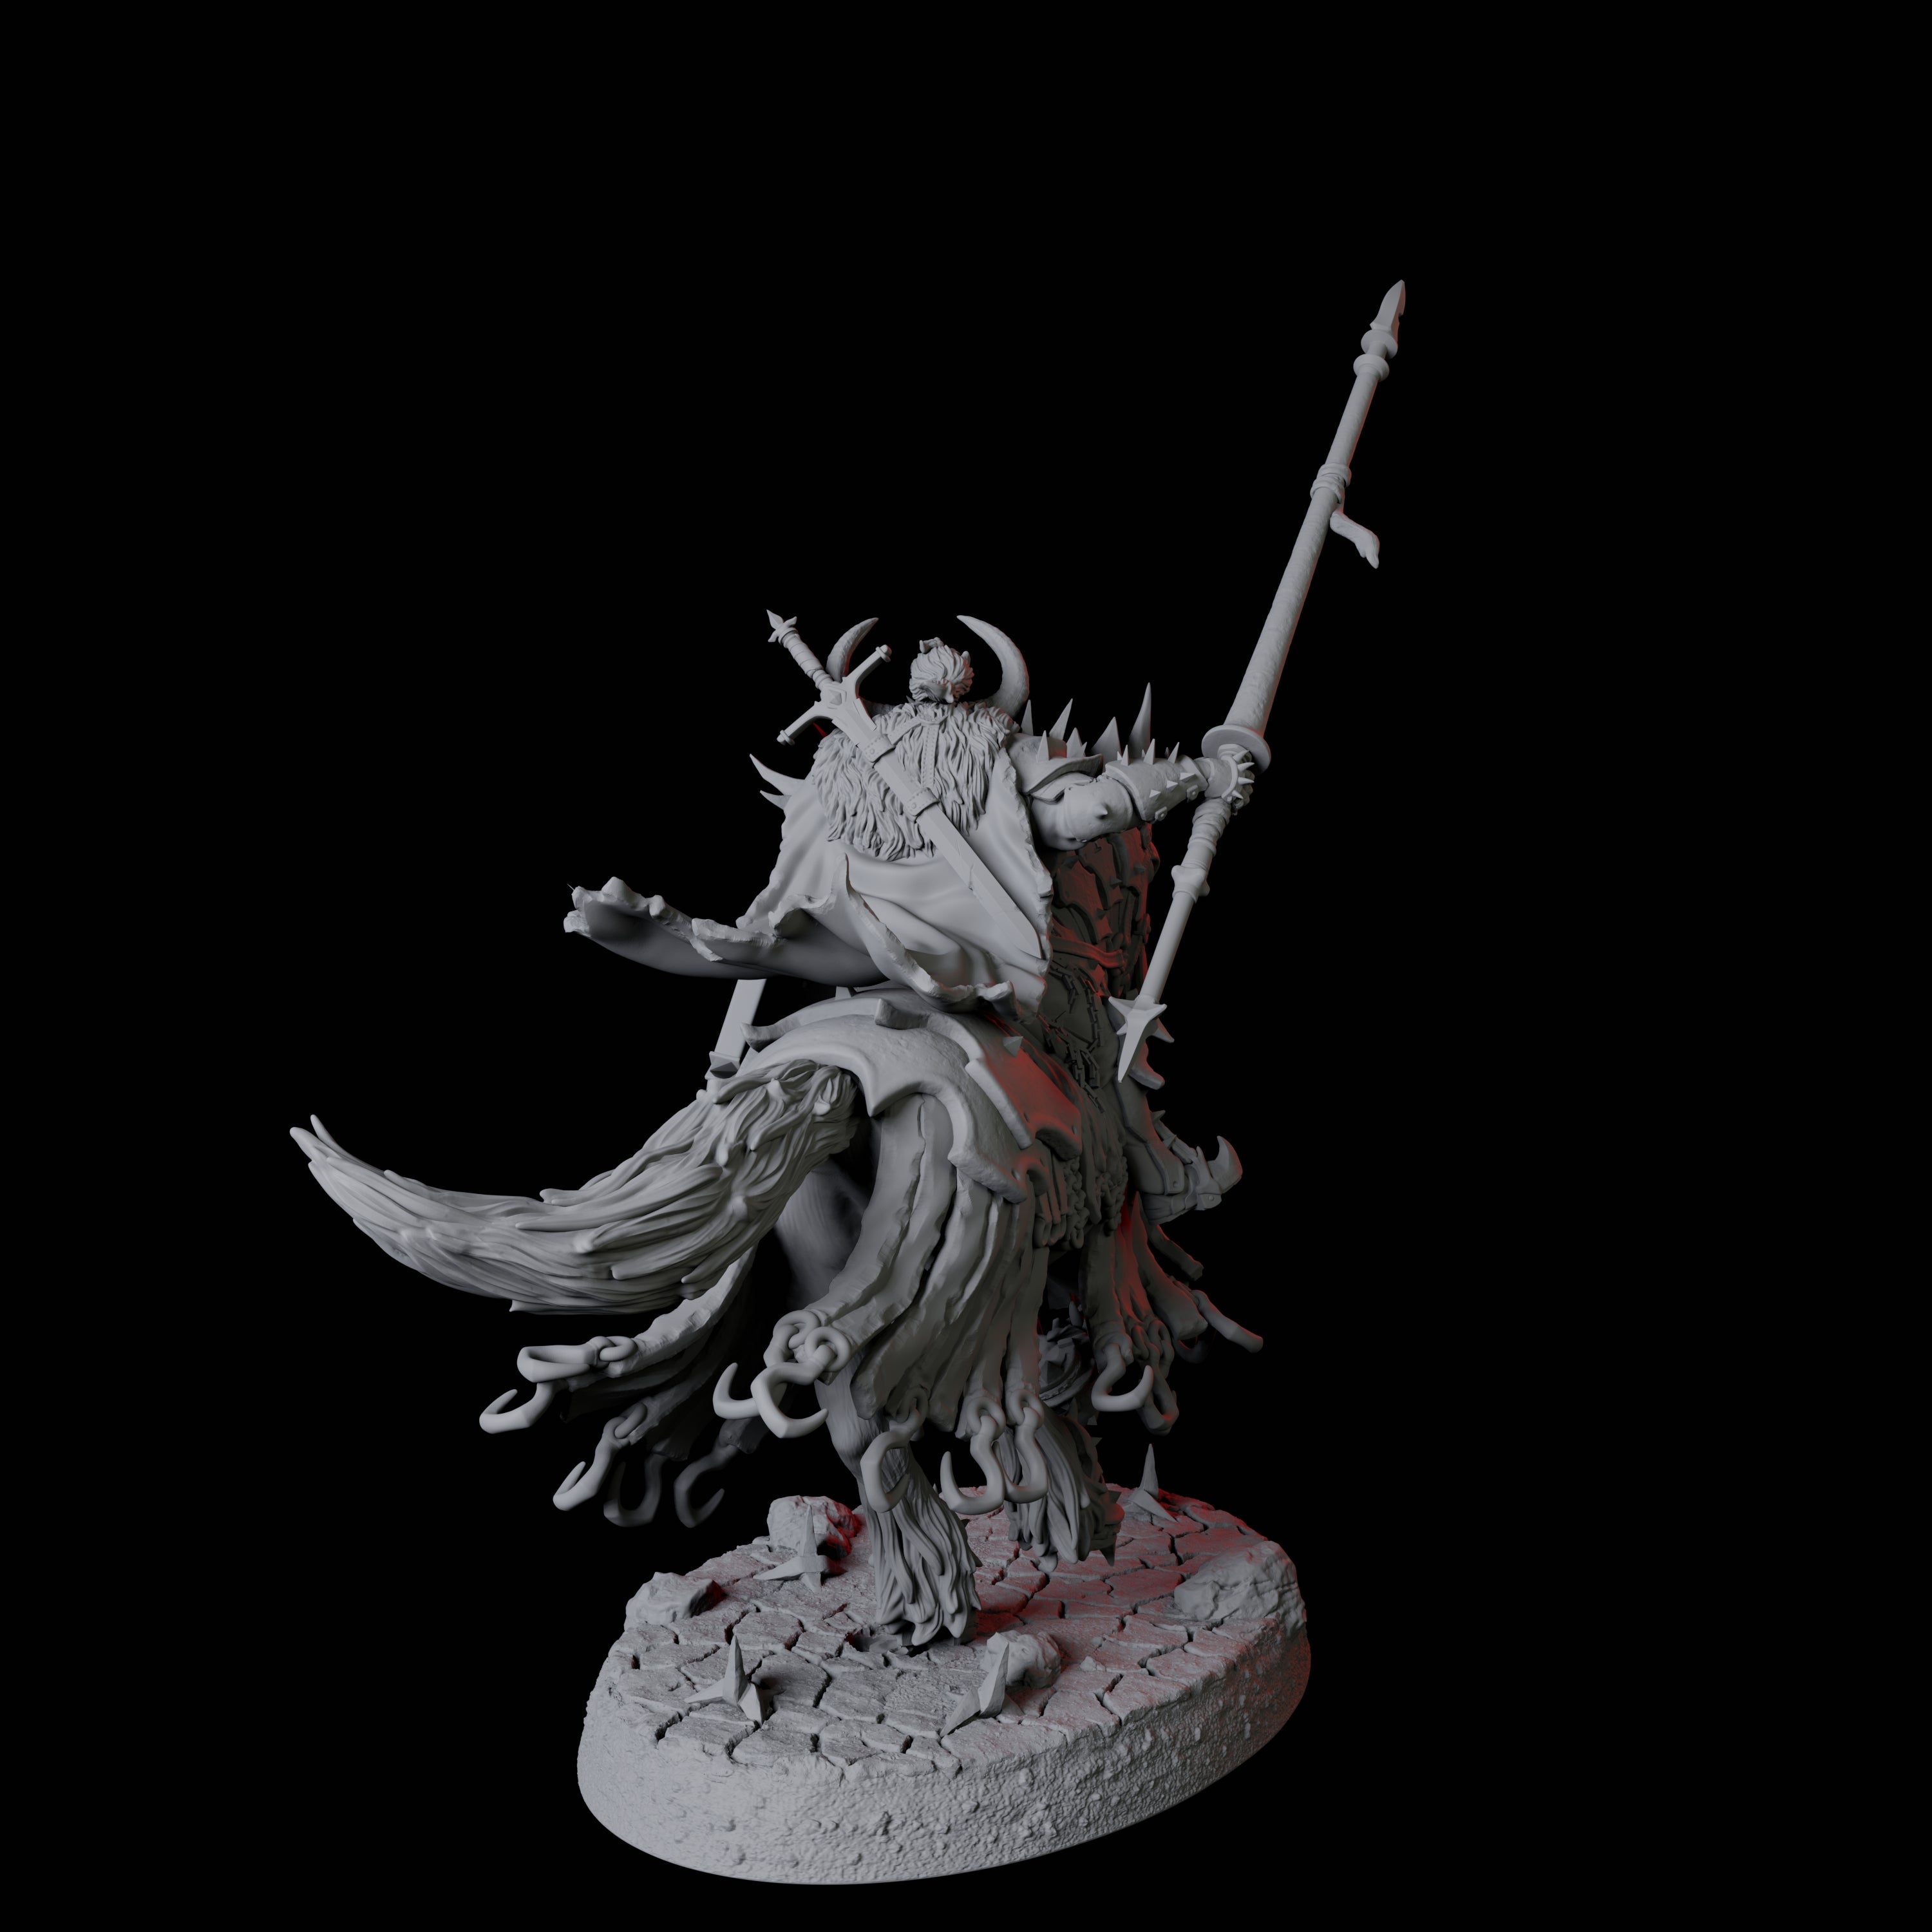 Charging Knight B Miniature for Dungeons and Dragons, Pathfinder or other TTRPGs